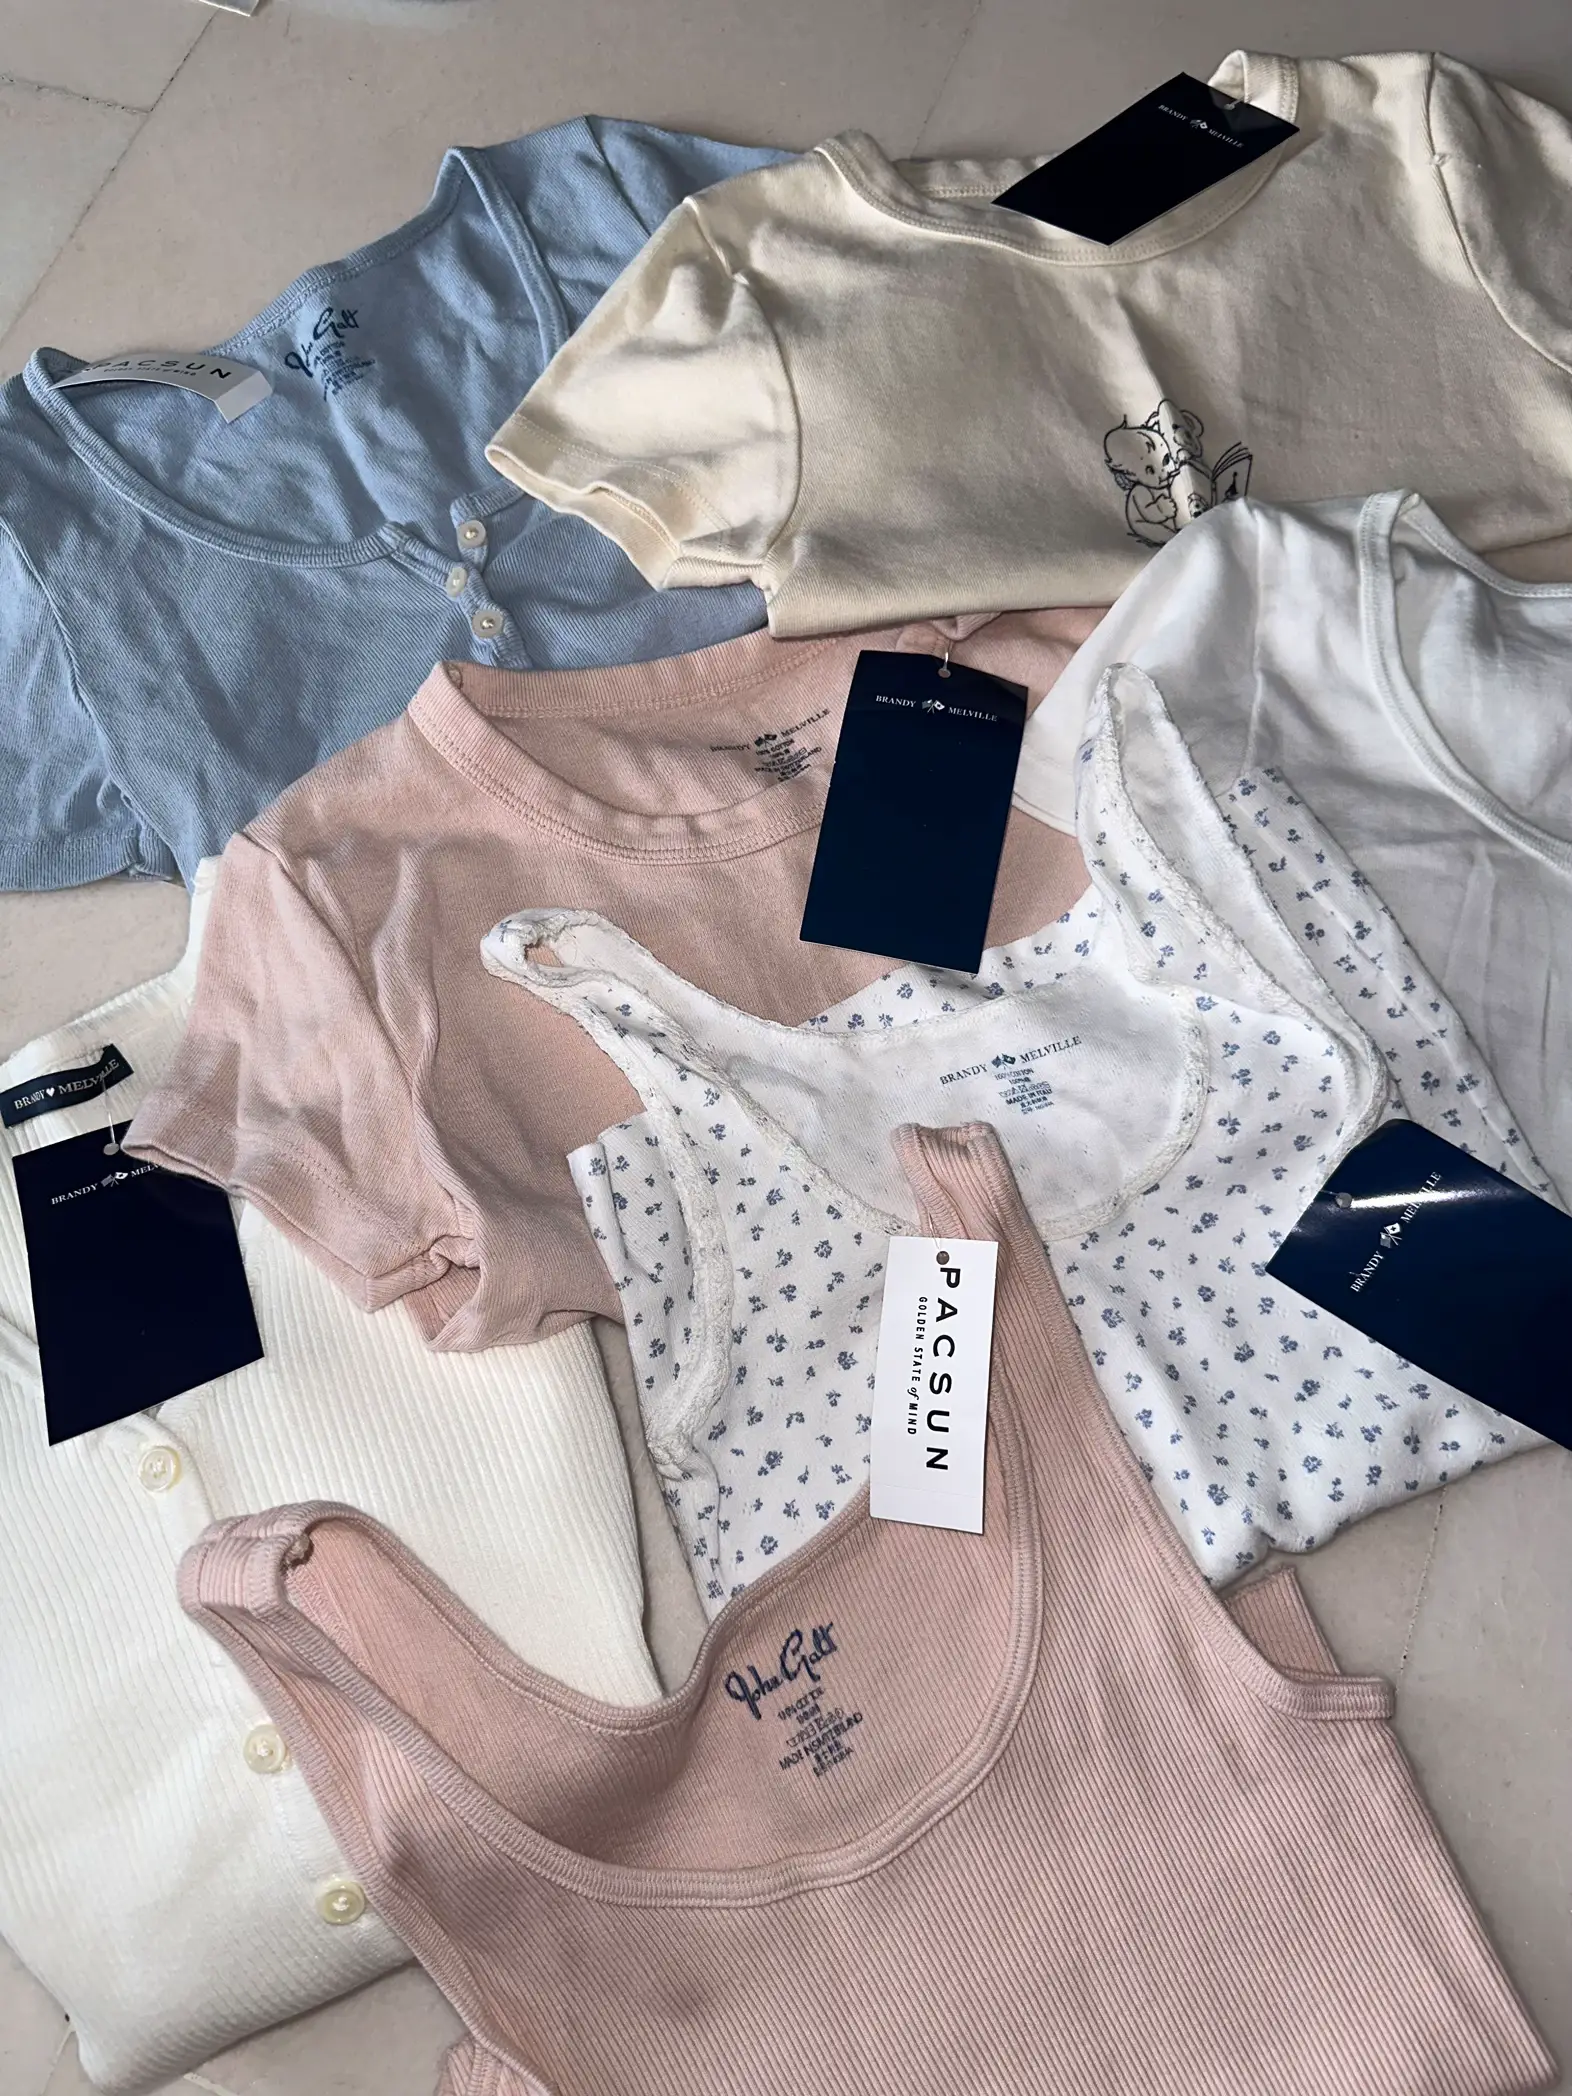 BRANDY MELVILLE NOW SHIPS TO SG & my try-ons🤭, Gallery posted by yuki  ⋆˚✿˖°